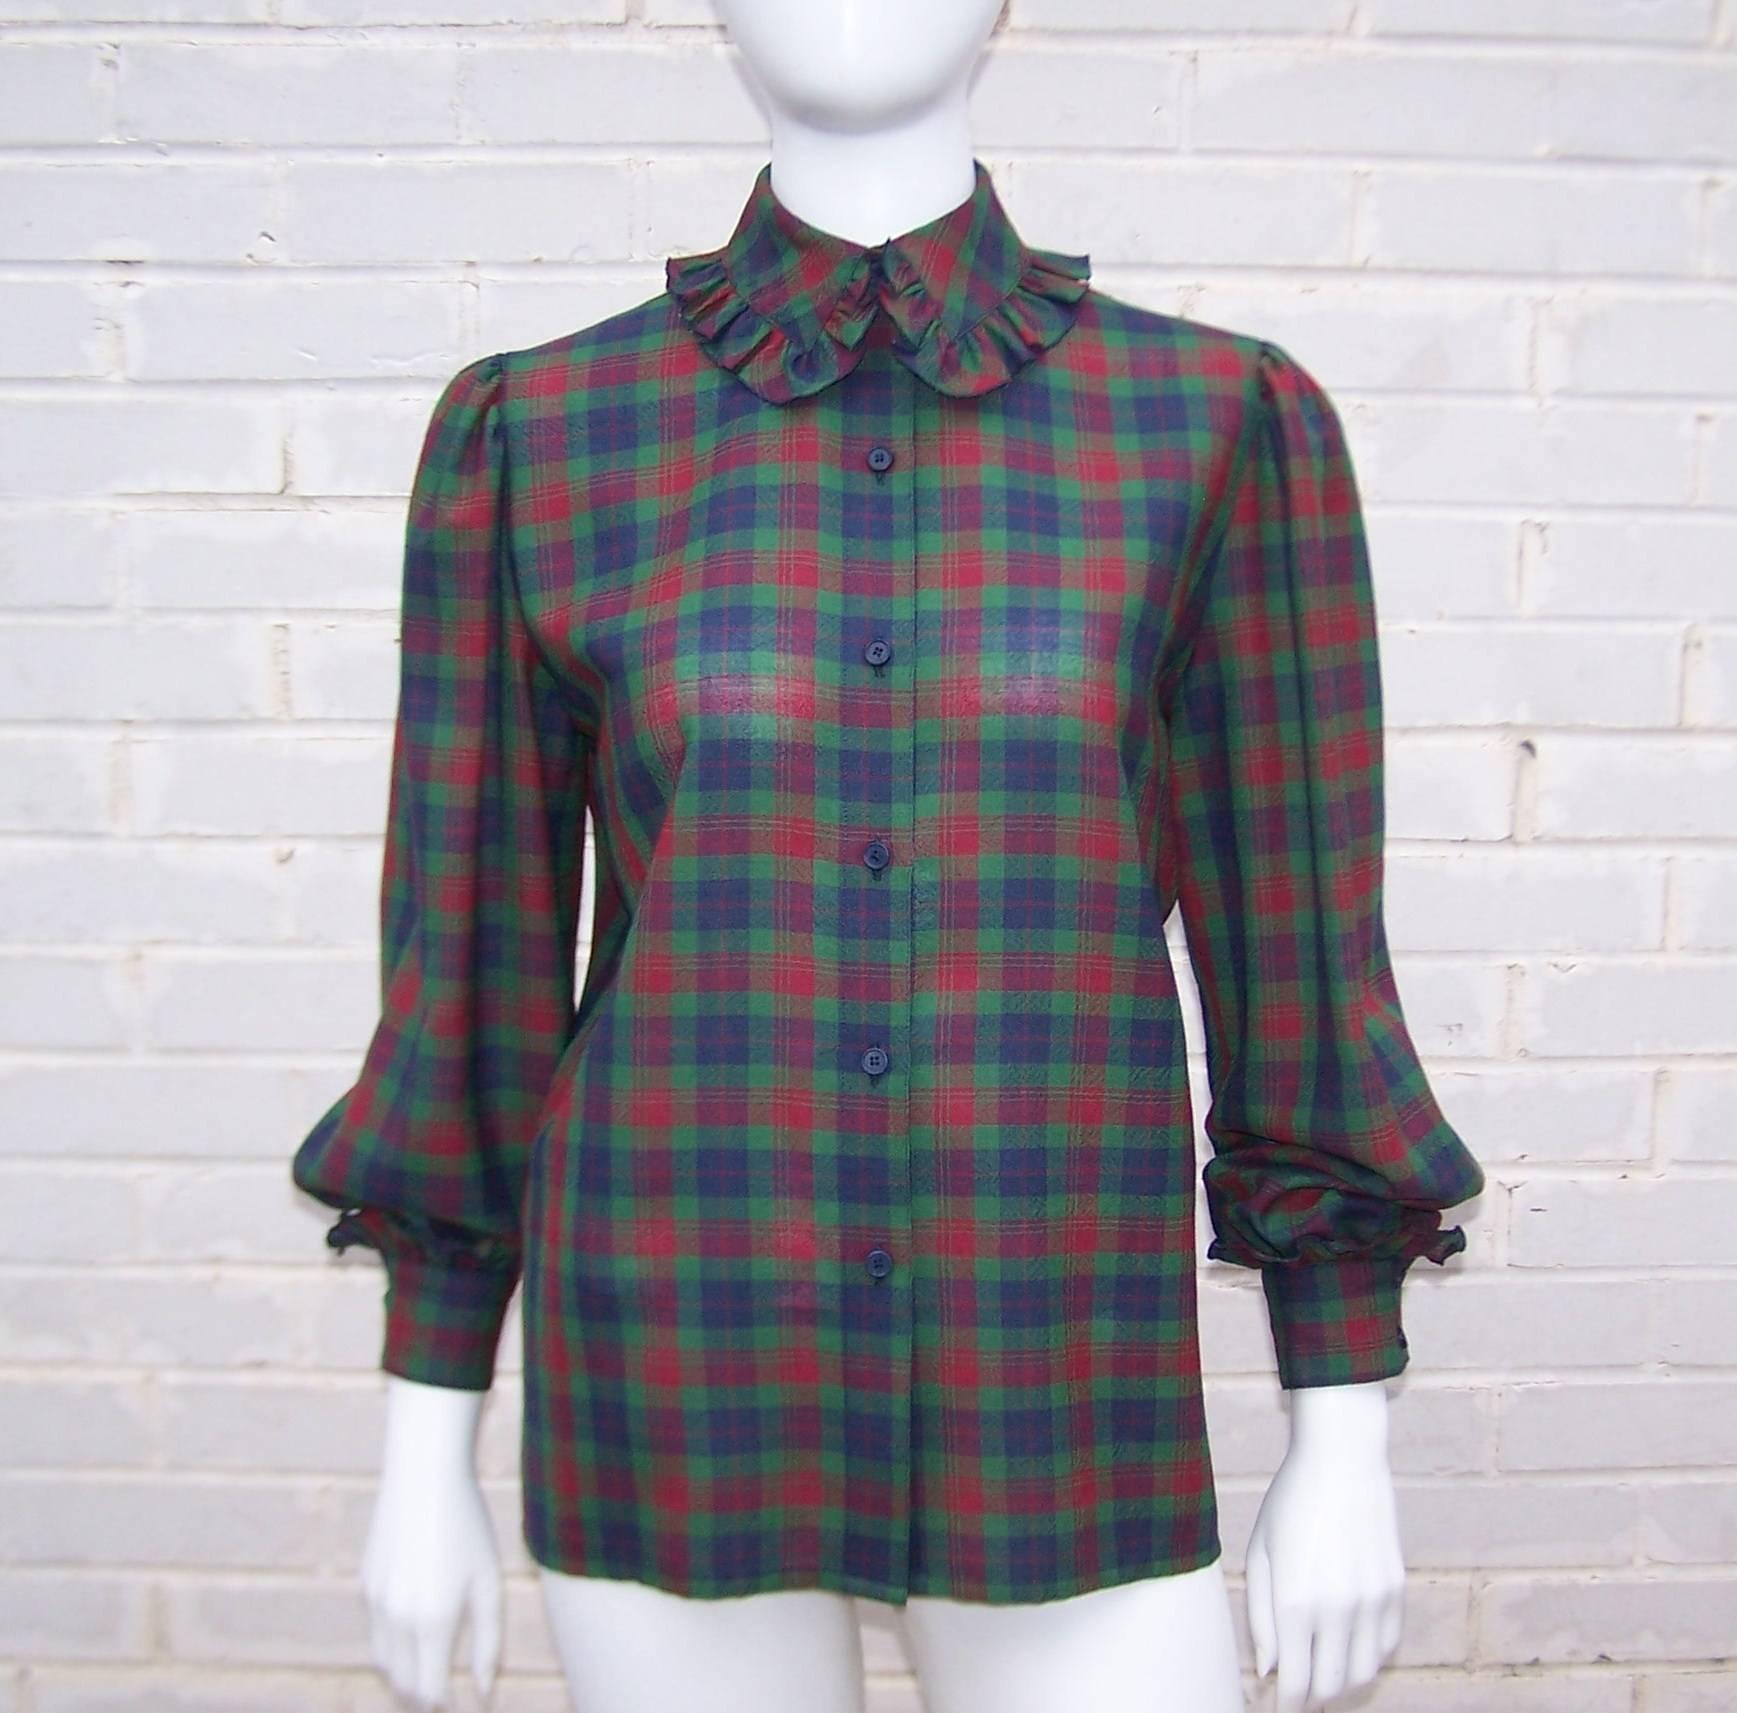 This is a charming 1970's wool plaid shirt with a style reminiscent of a turn-of-the-century school girl.  It buttons at the front with a rounded ruffled collar and a boxy construction.  There is soft pleating at the shoulder and wide ruffled cuffs